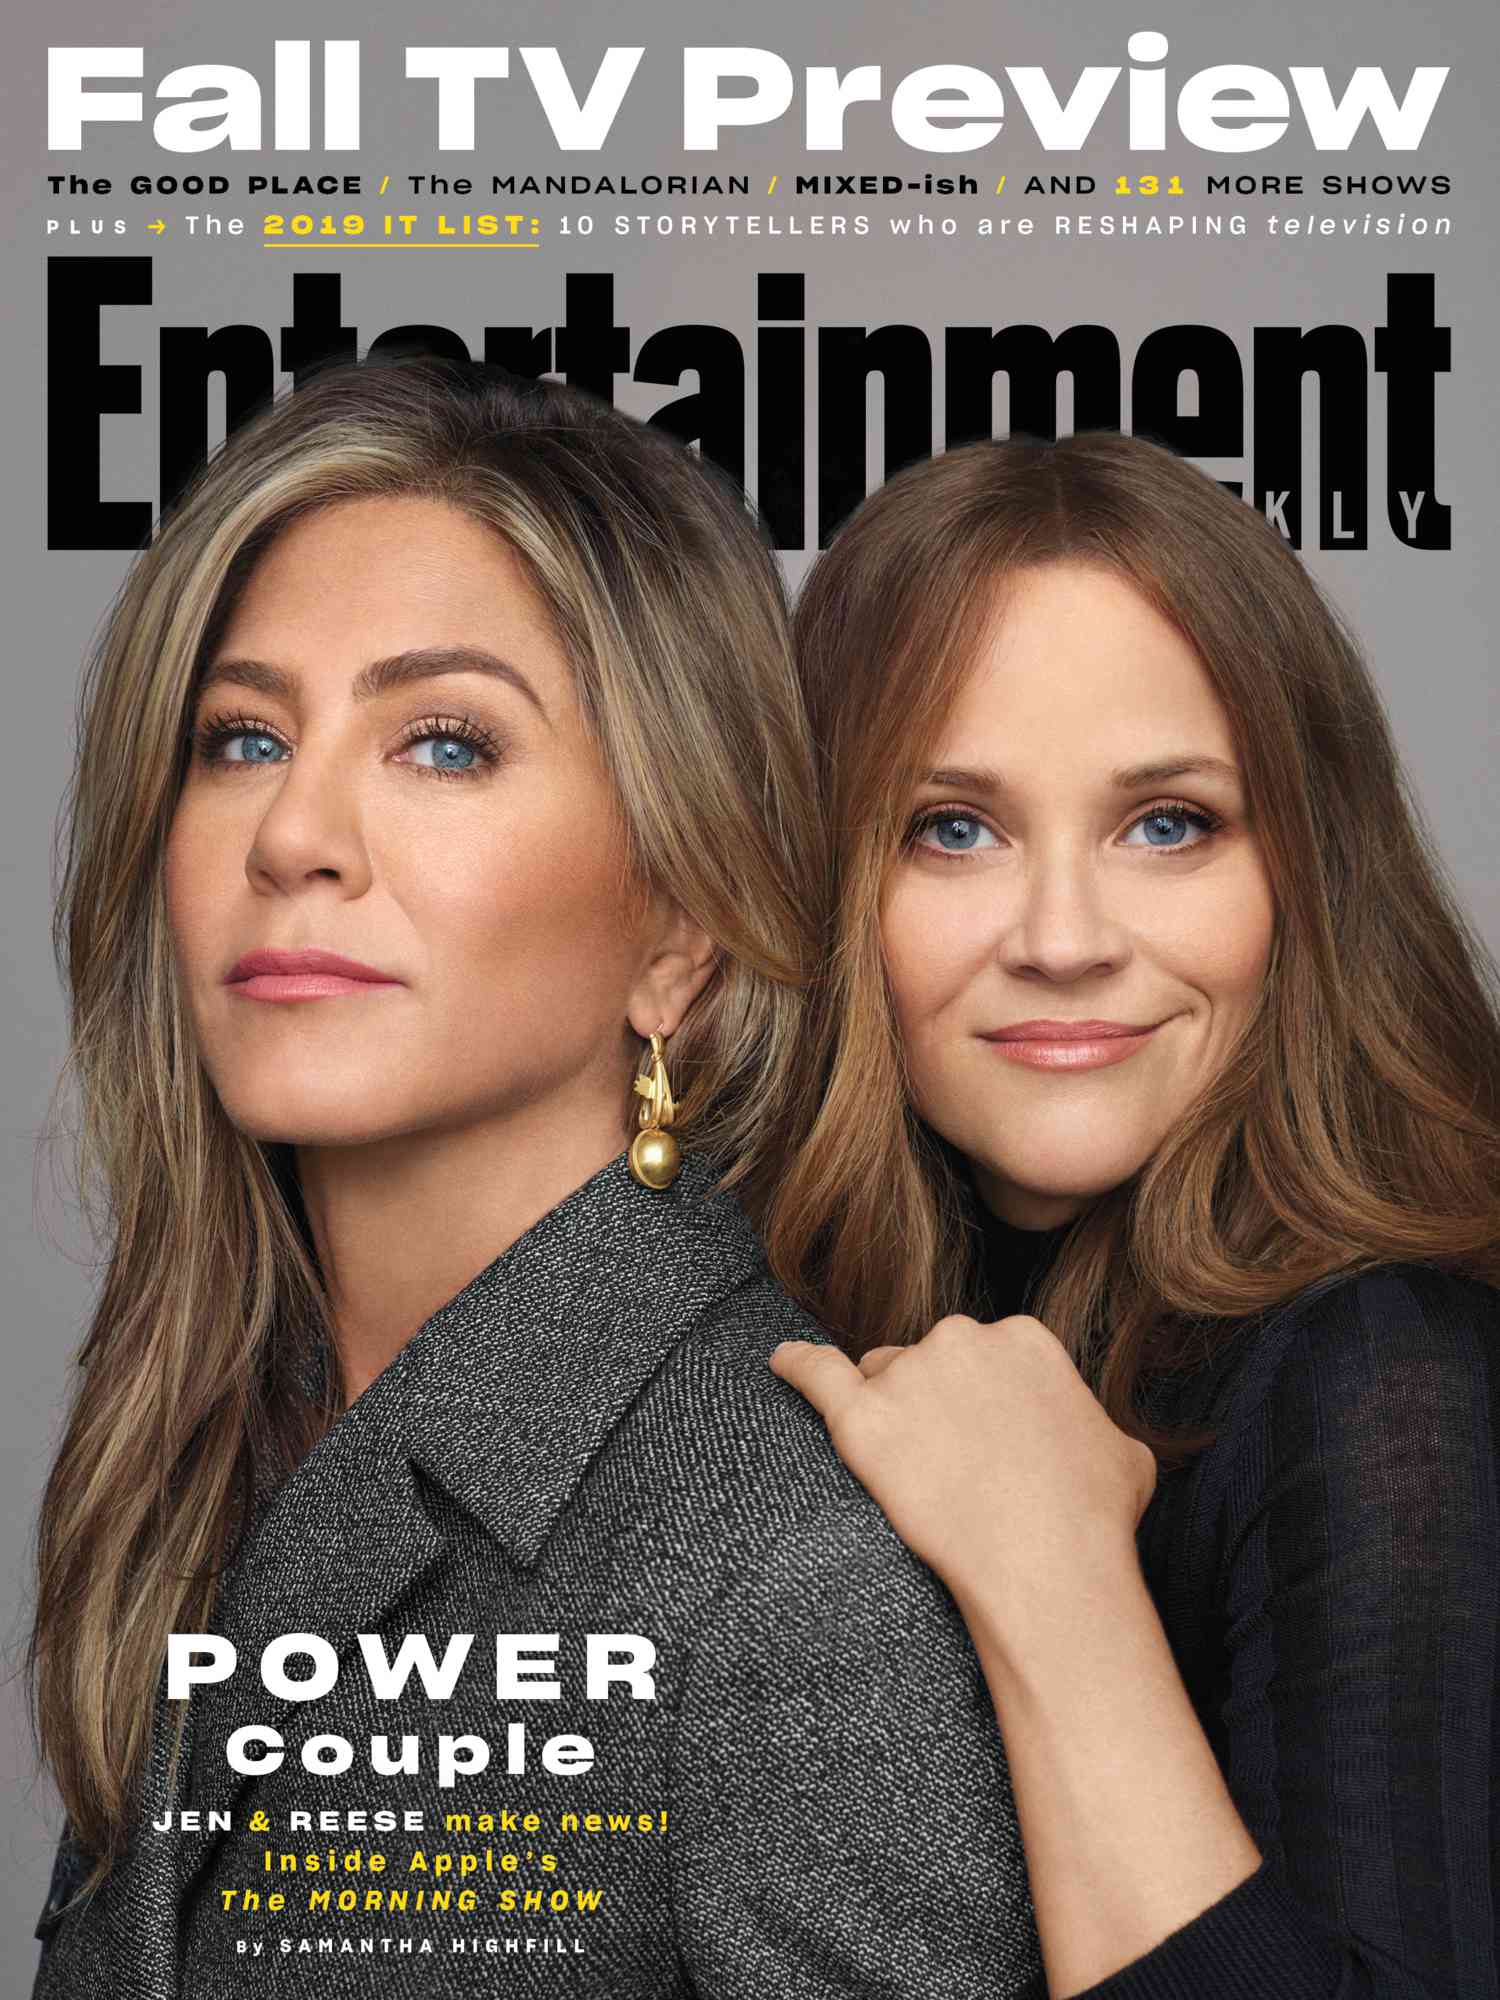 10.19.19 EW coverCANNOT APPEAR ANYWHERE UNTIL AFTER 9.10.19